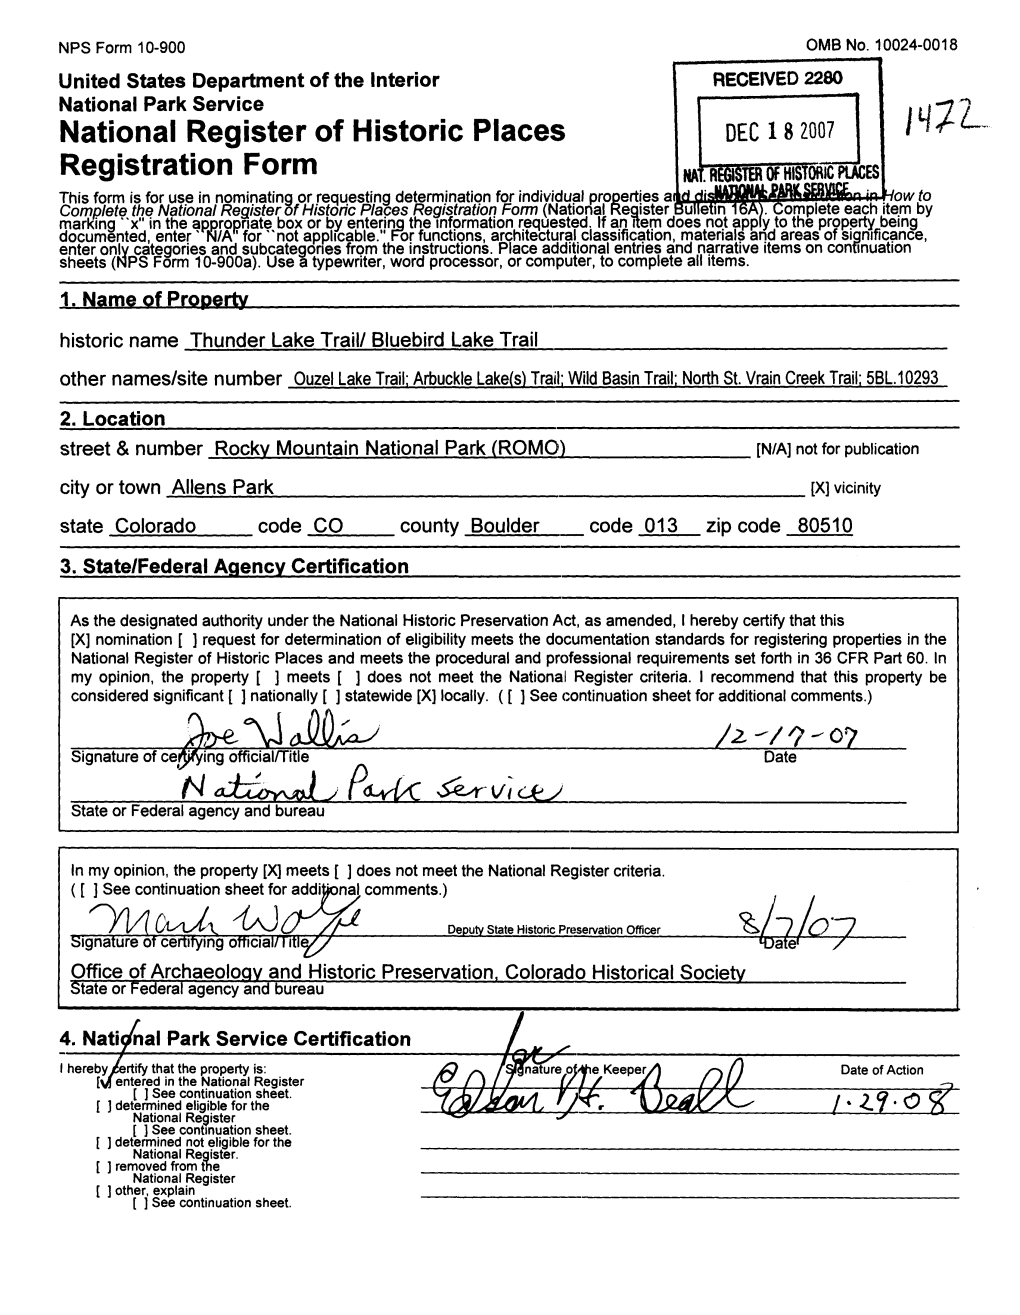 National Register of Historic Places Registration Form (National Re-1-"" Marking "X" in the Appropriate Box Or by Entering the Information Requested